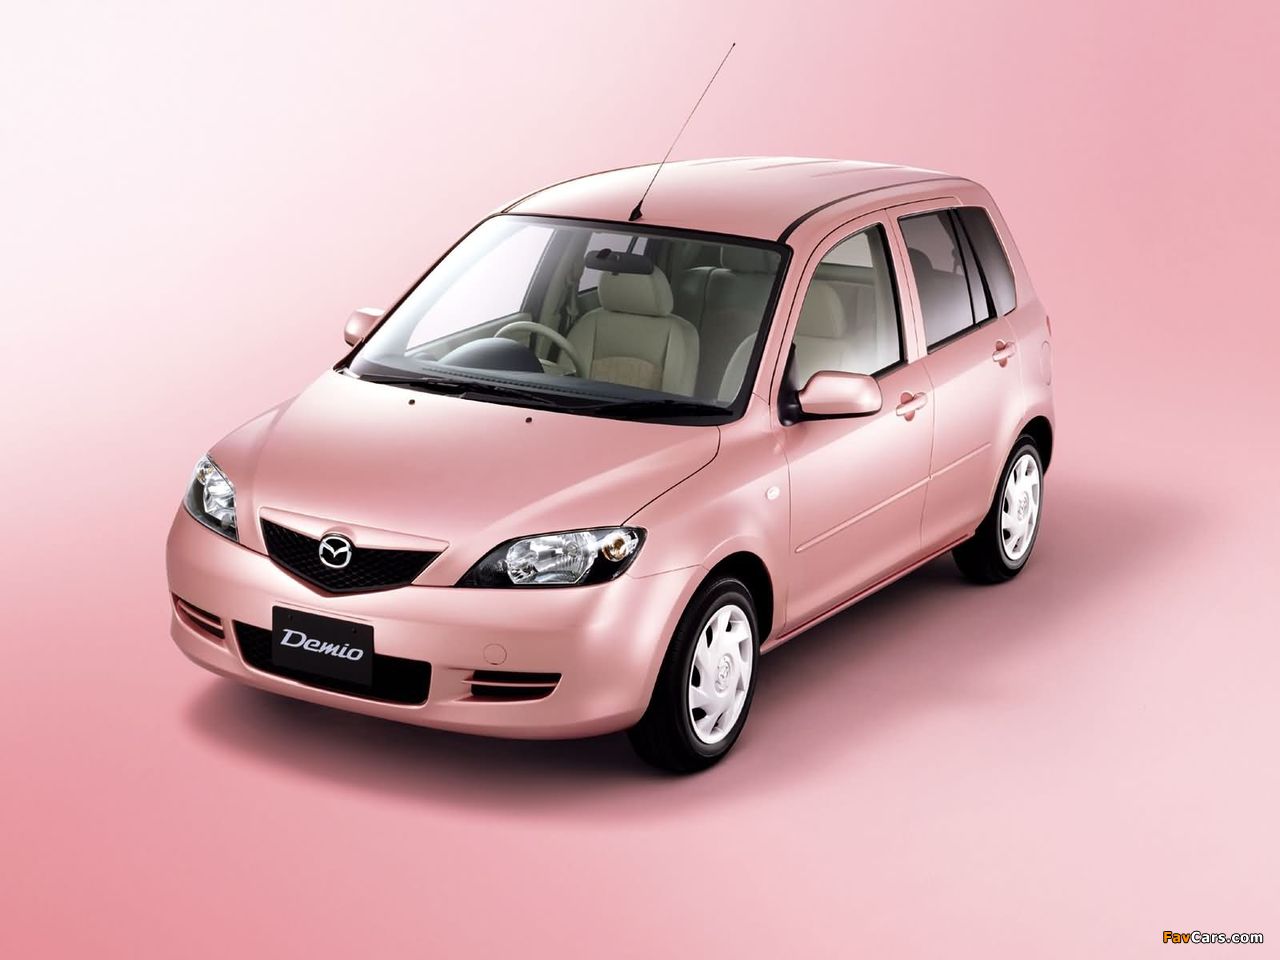 Images of Mazda Demio Stardust Pink (DY3W) 2003 (1280 x 960)